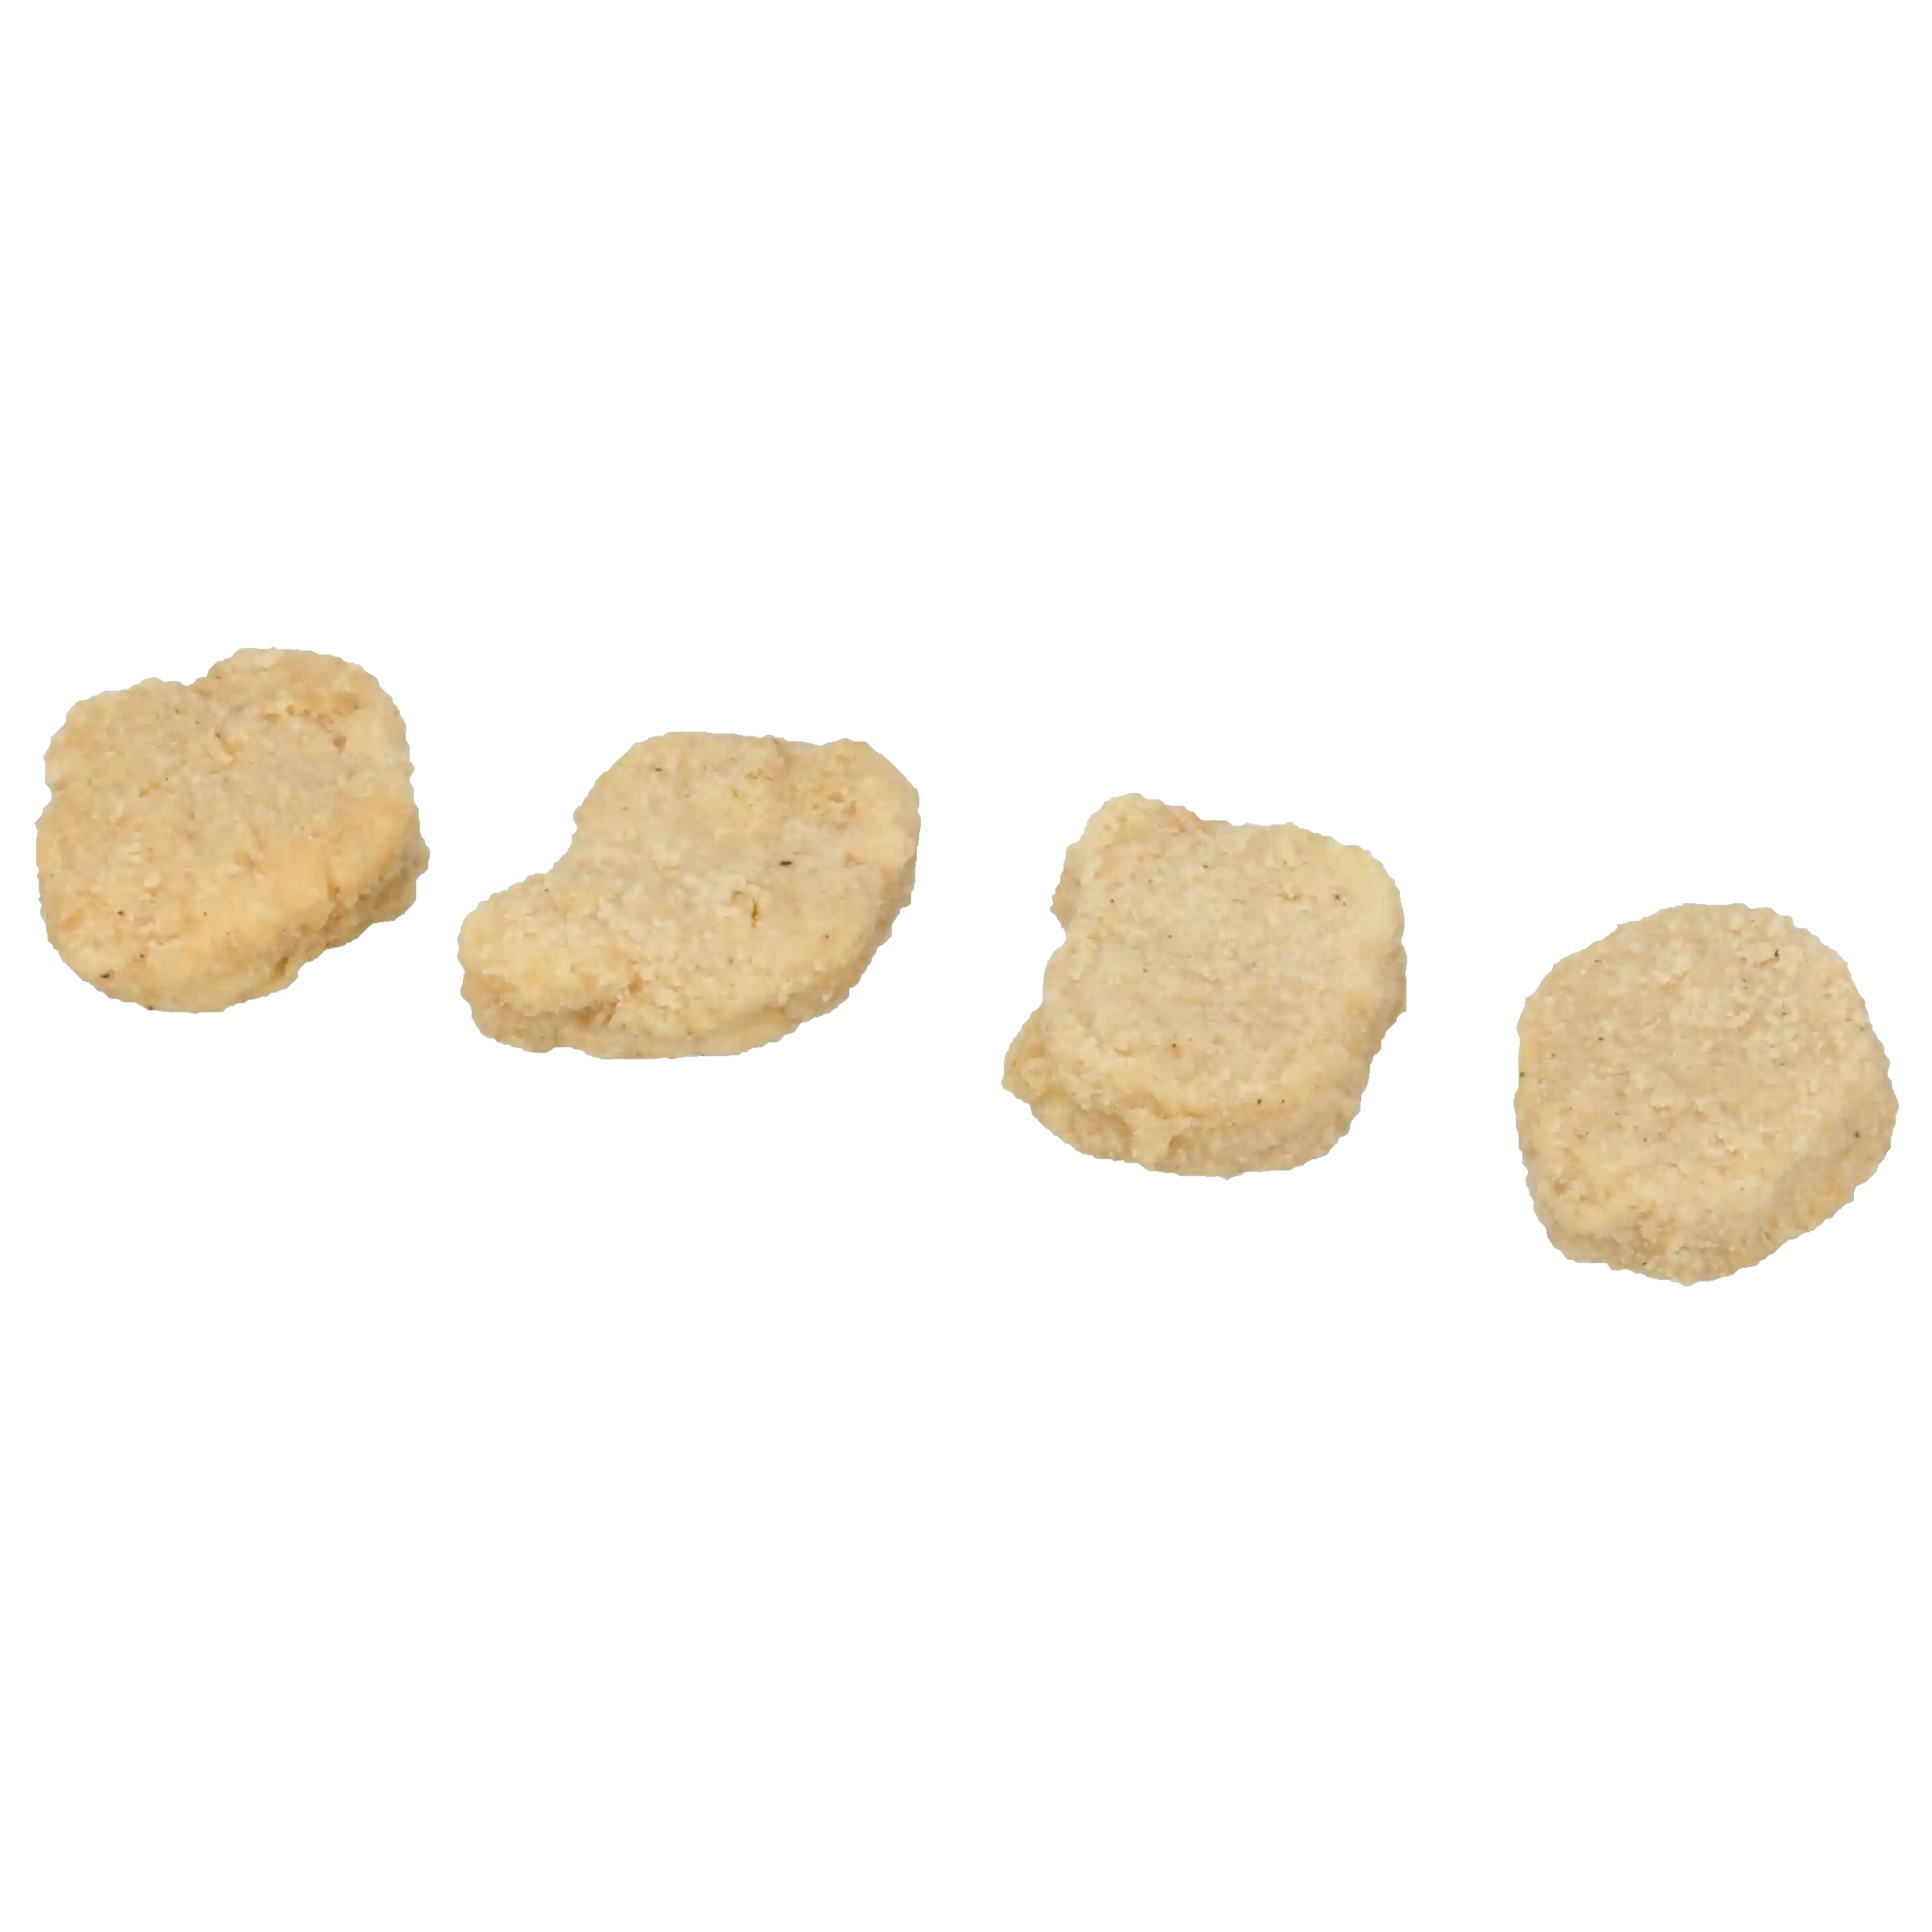 Tyson® Fully Cooked Whole Grain Breaded Chicken Nuggets, CN, 0.67 oz. _image_21